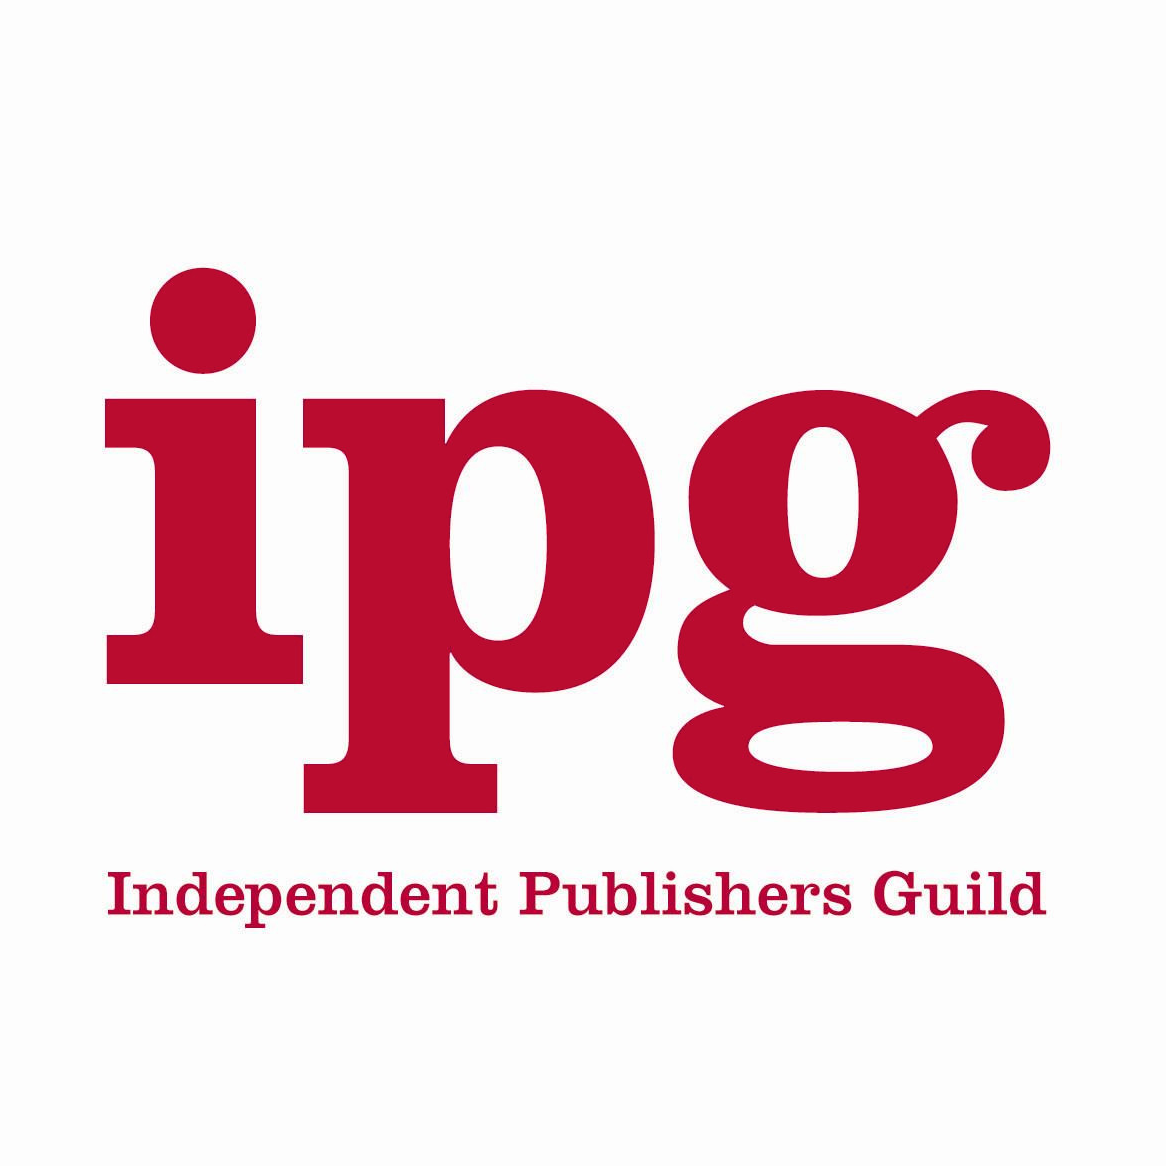 The IPG Autumn Conference was a huge success! The Black Spring Press